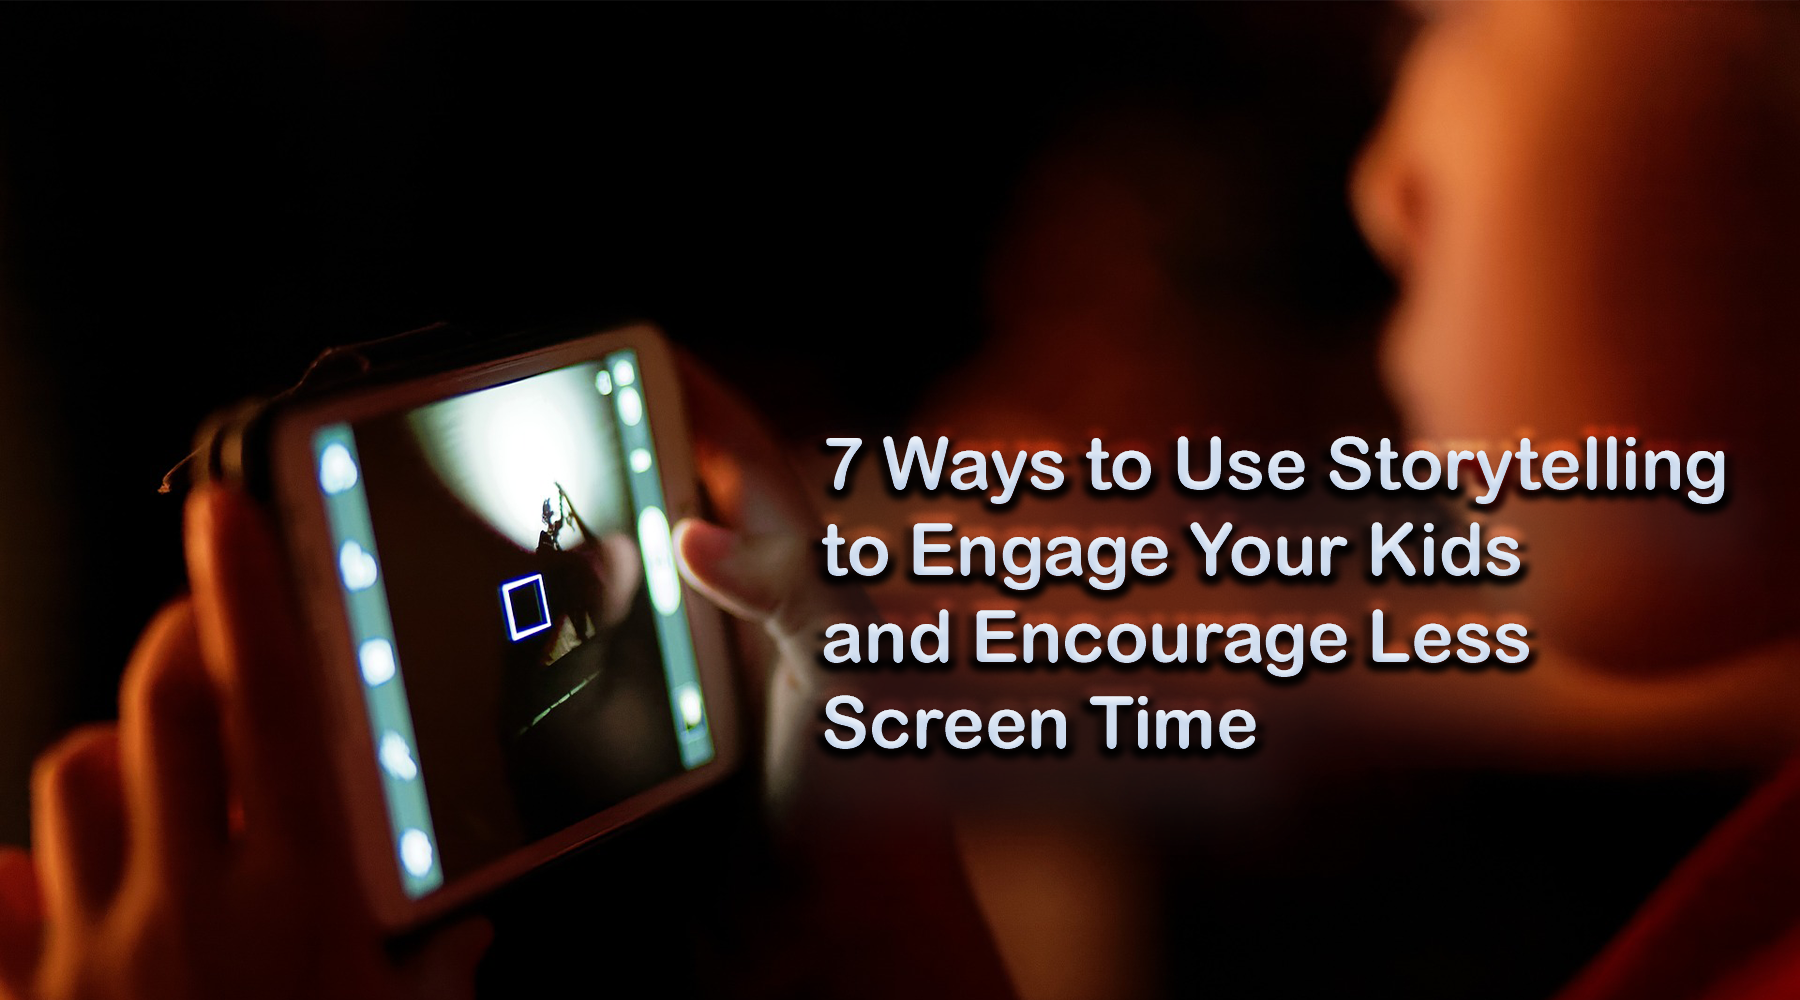 7 Ways to Use Storytelling to Engage Your Kids and Encourage Less Screen Time